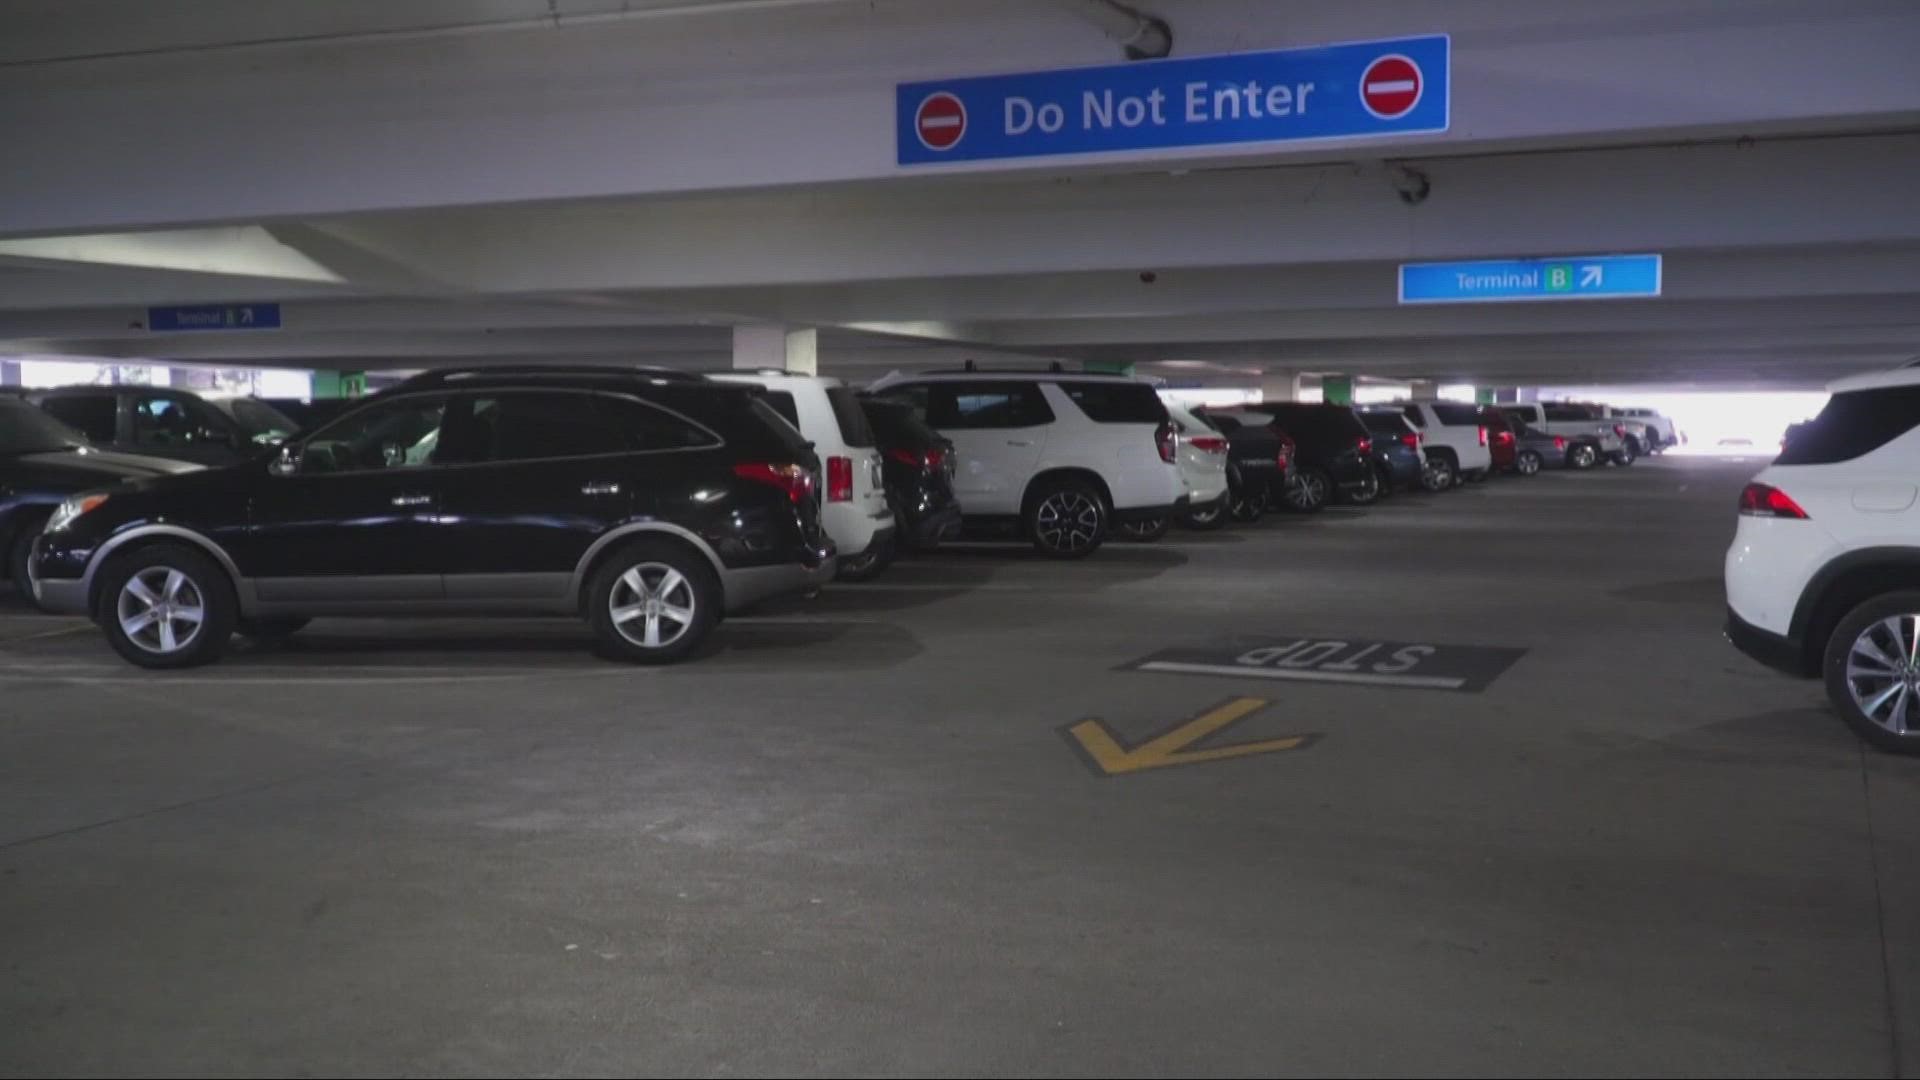 A construction project is causing a shortage of parking spaces, leading some people to voice their frustration online.